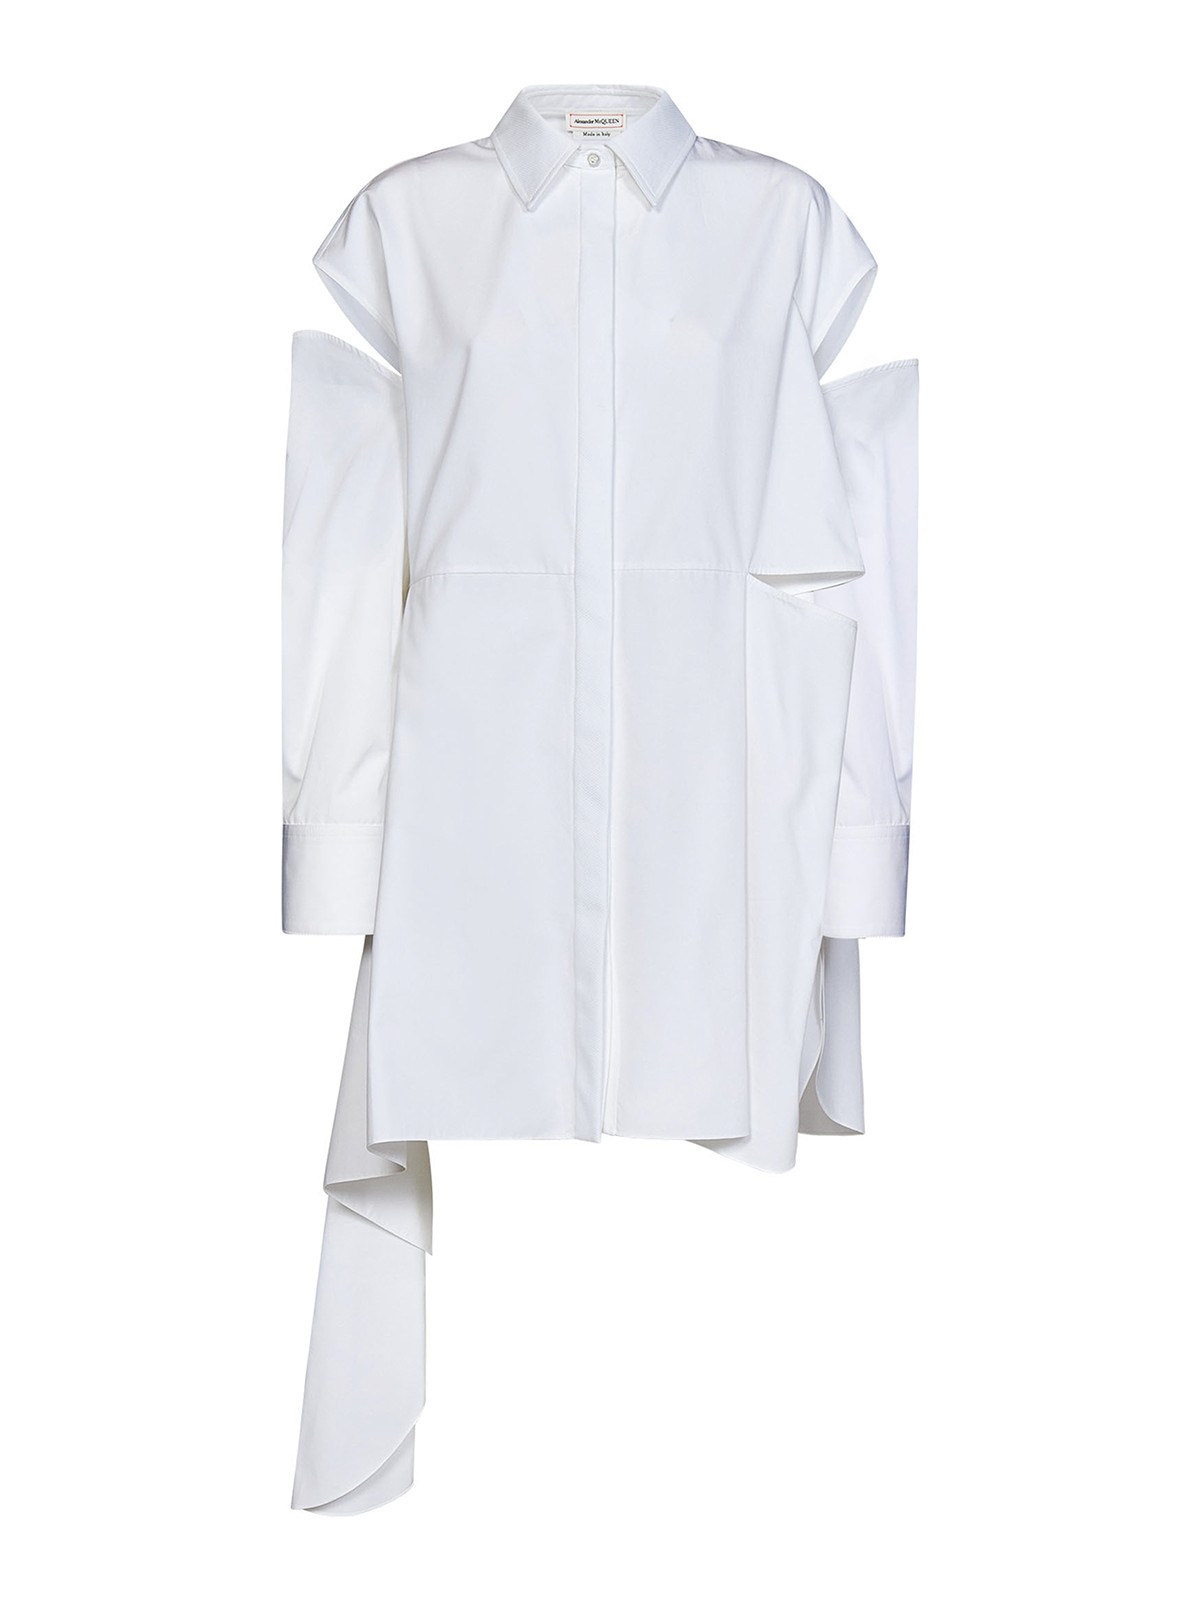 Alexander Mcqueen Short White Chemisier Dress With Cut-out